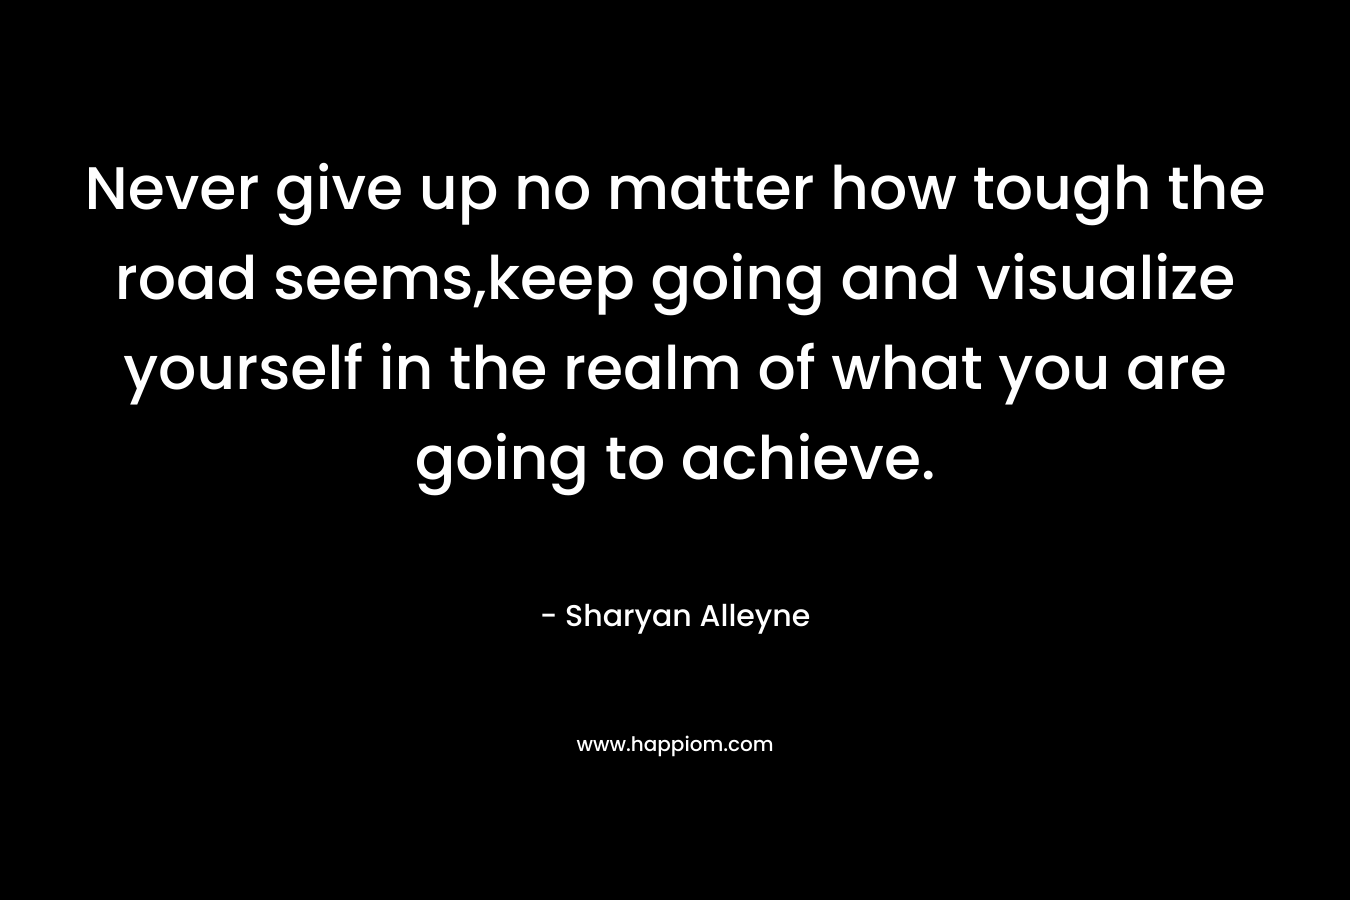 Never give up no matter how tough the road seems,keep going and visualize yourself in the realm of what you are going to achieve. – Sharyan Alleyne